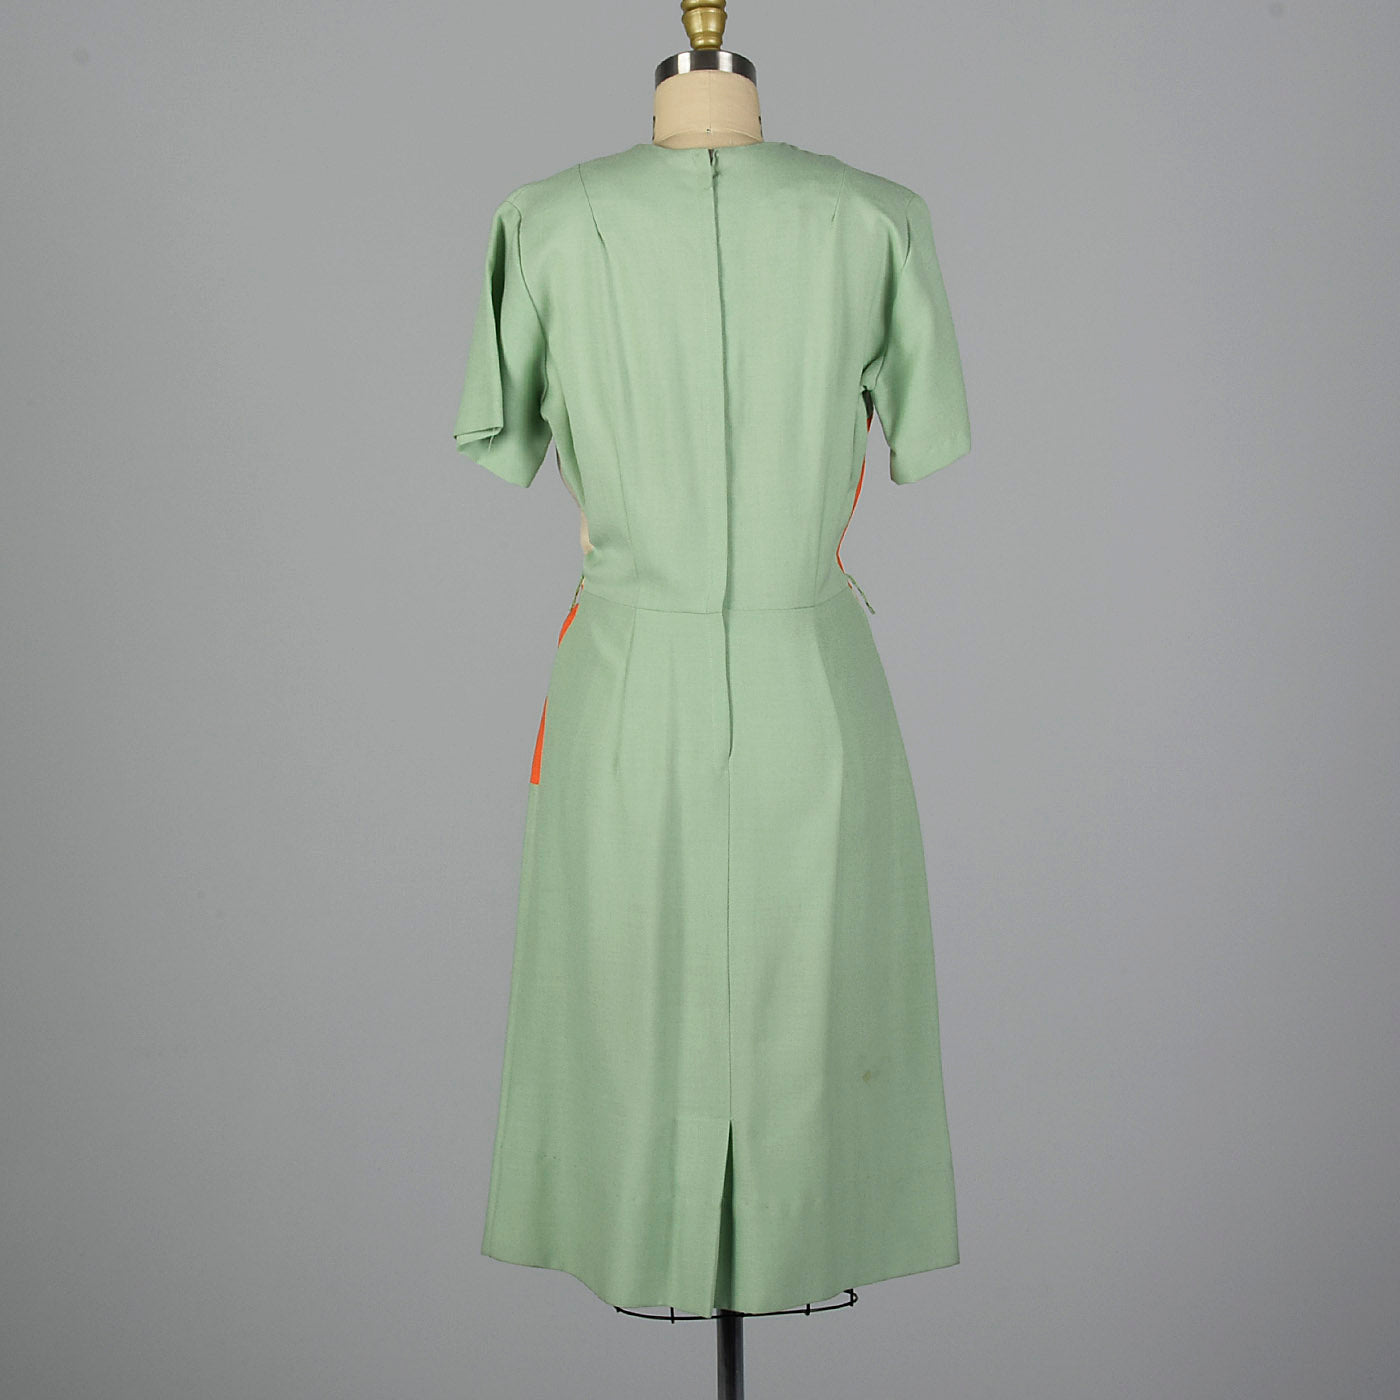 1950s Day Dress with Color Block Waist